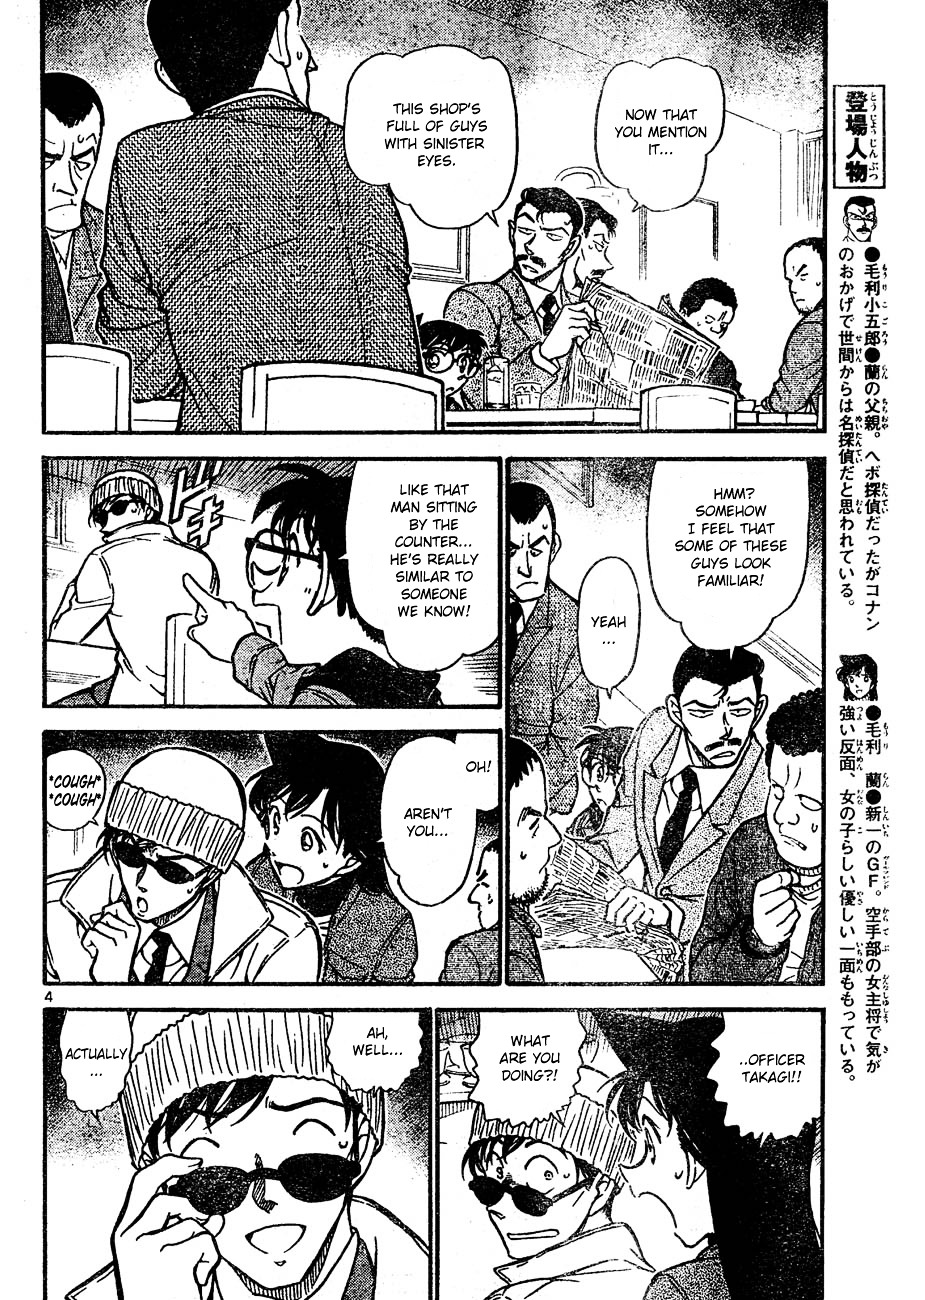 Detective Conan chapter 641 page 4